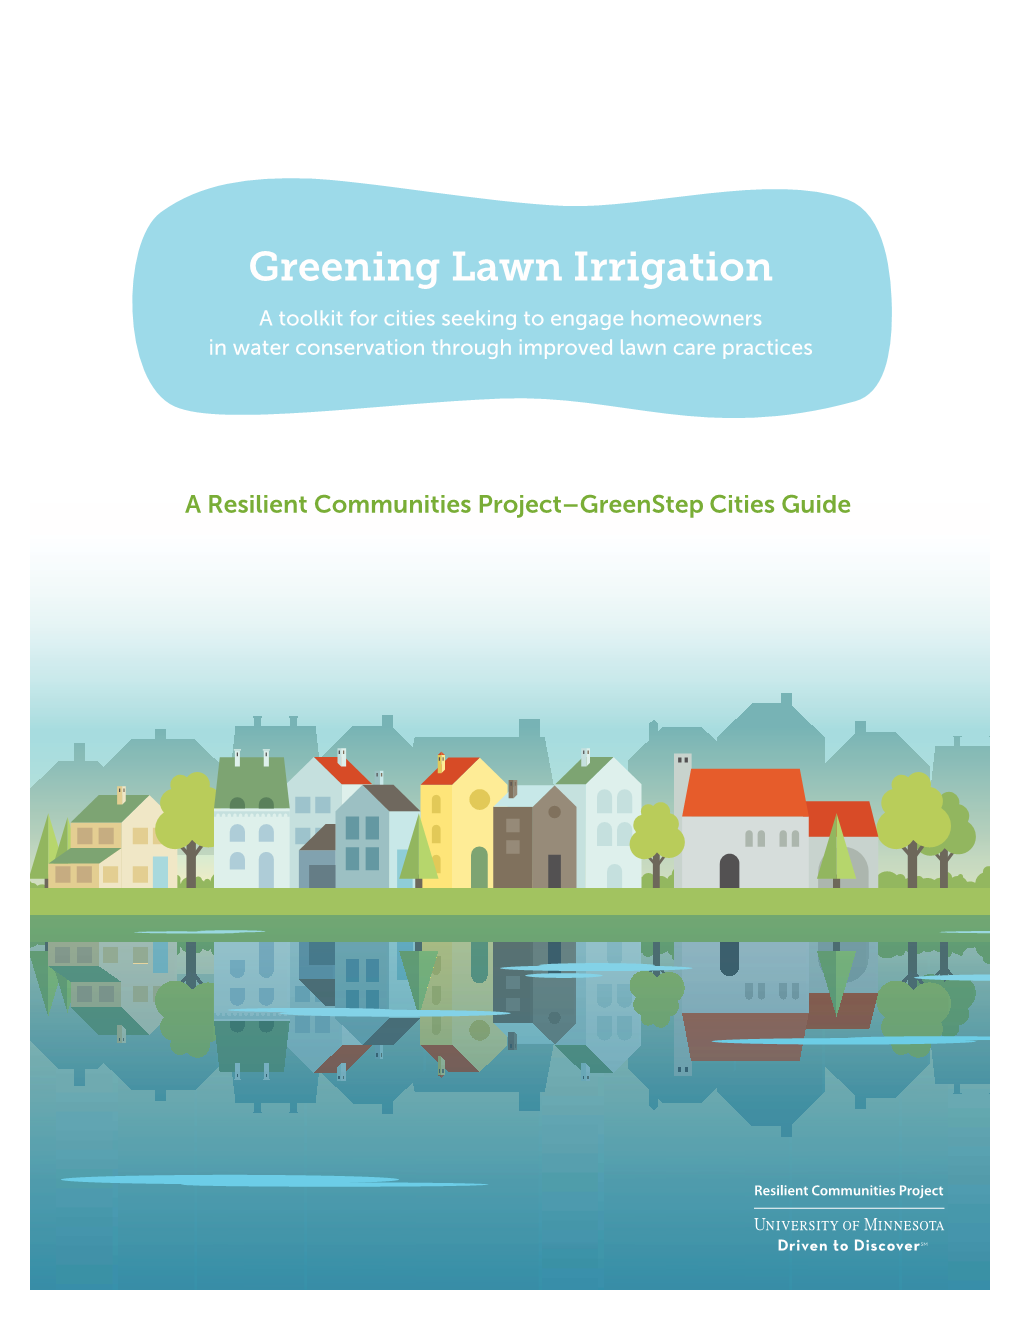 Greening Lawn Irrigation a Toolkit for Cities Seeking to Engage Homeowners in Water Conservation Through Improved Lawn Care Practices